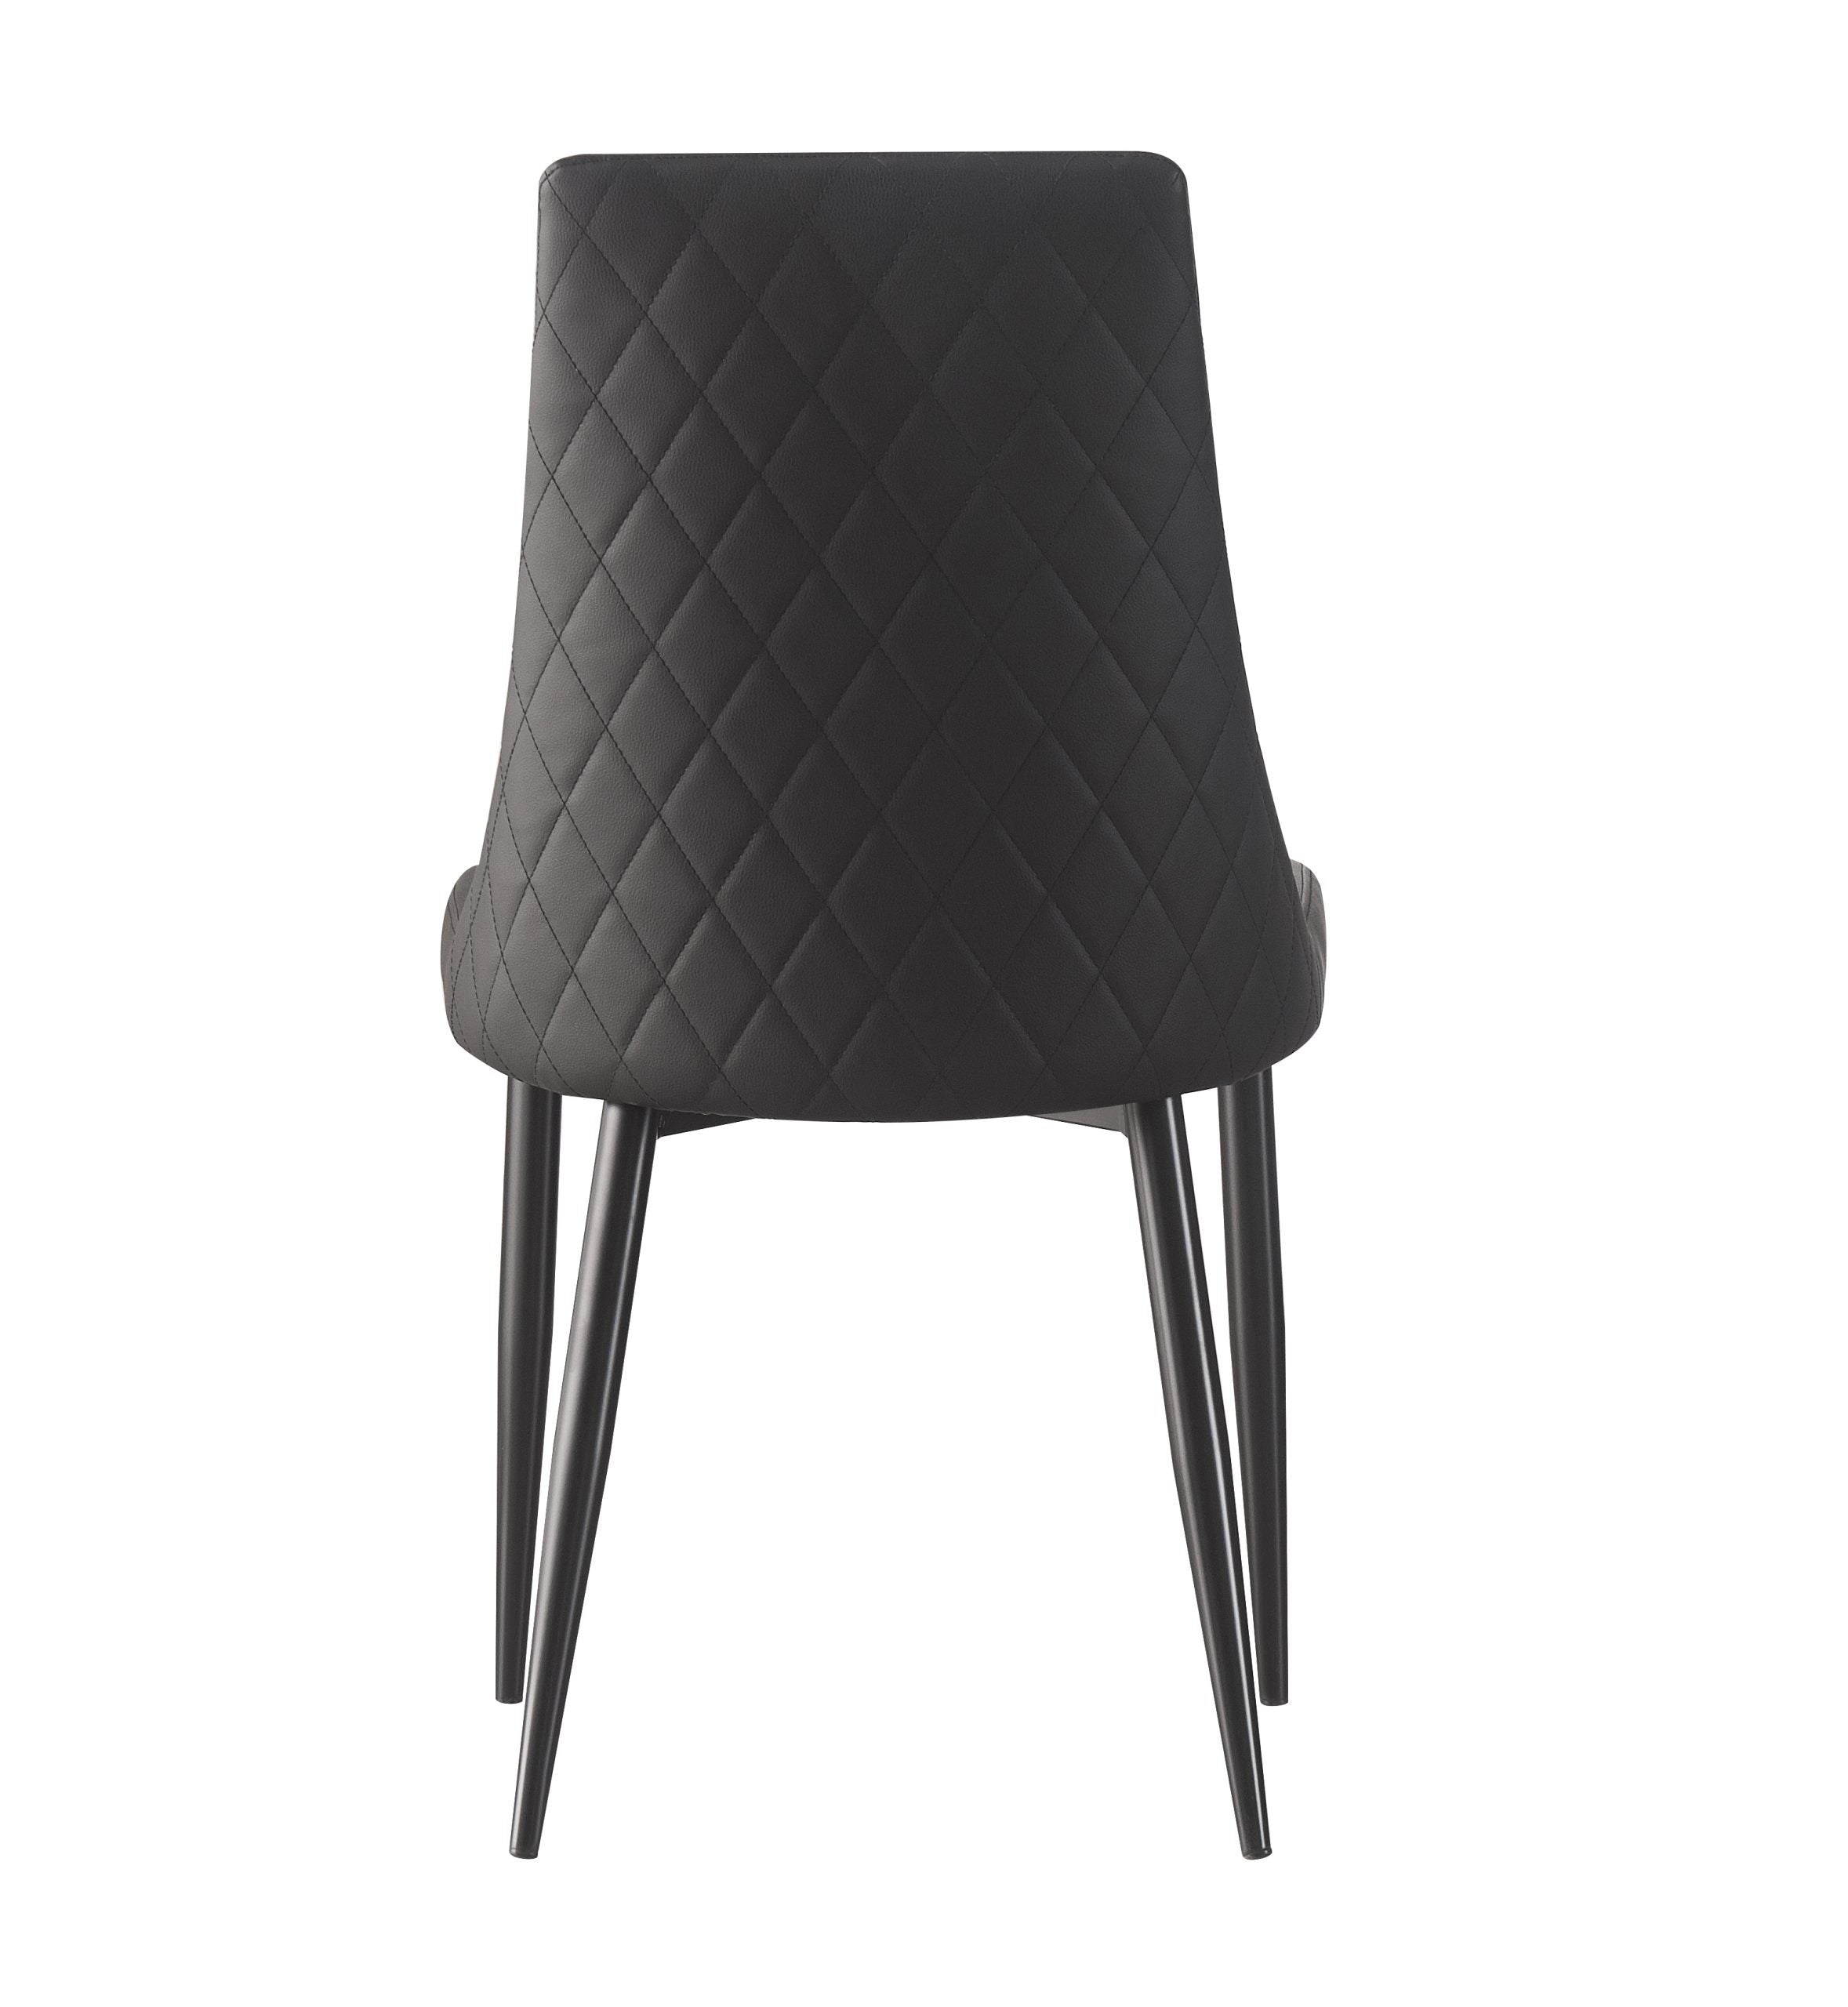 BT Magnus PU Leather Upholstered Dining Chair